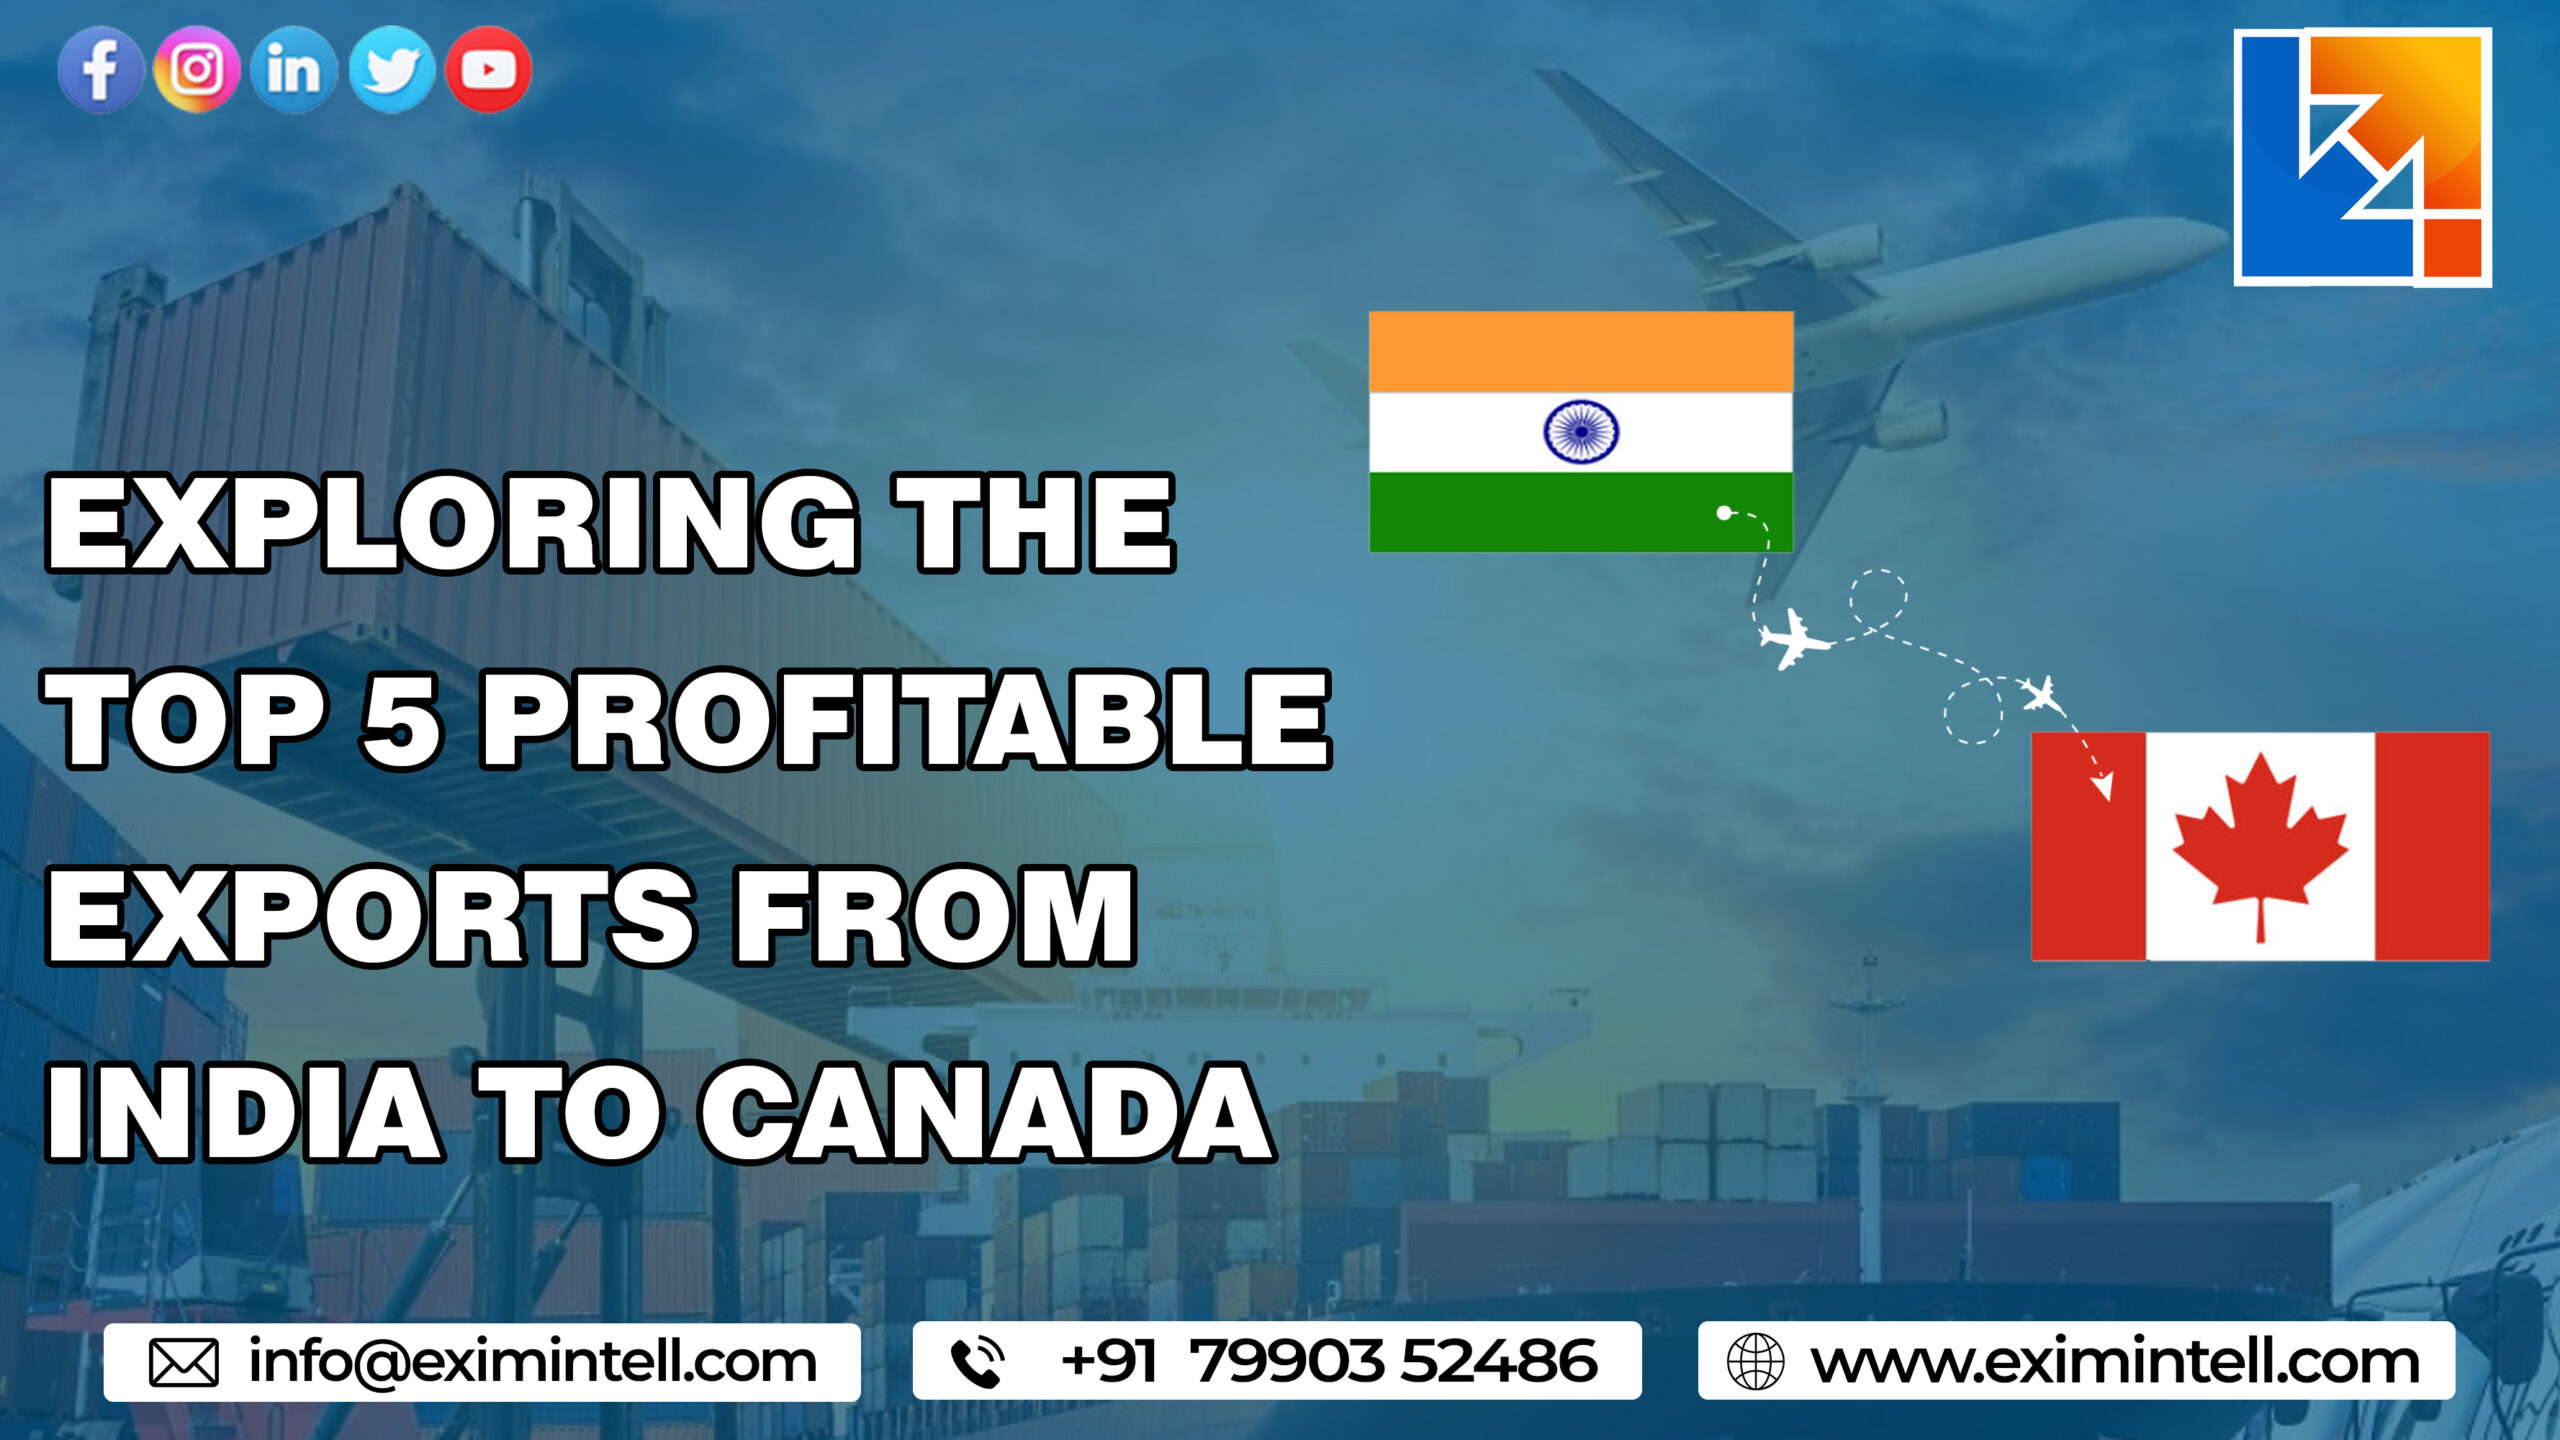 Exploring the Top 5 Profitable Exports from India to Canada